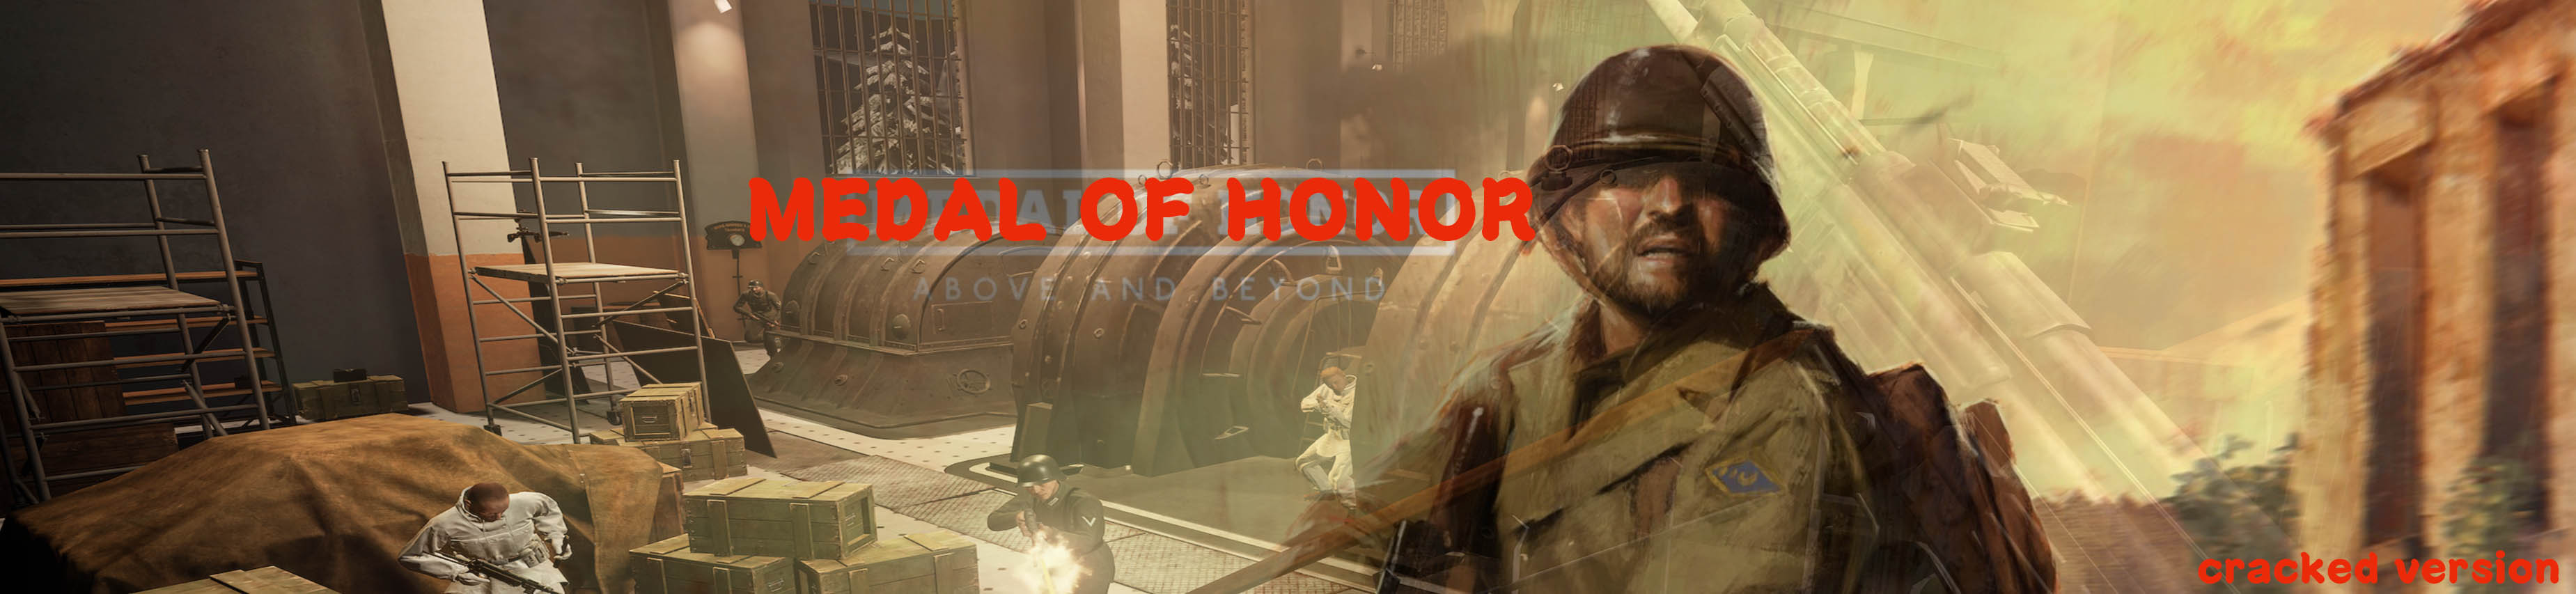 Medal of Honor: Above and Beyond (Meta Quest 2), cracked game